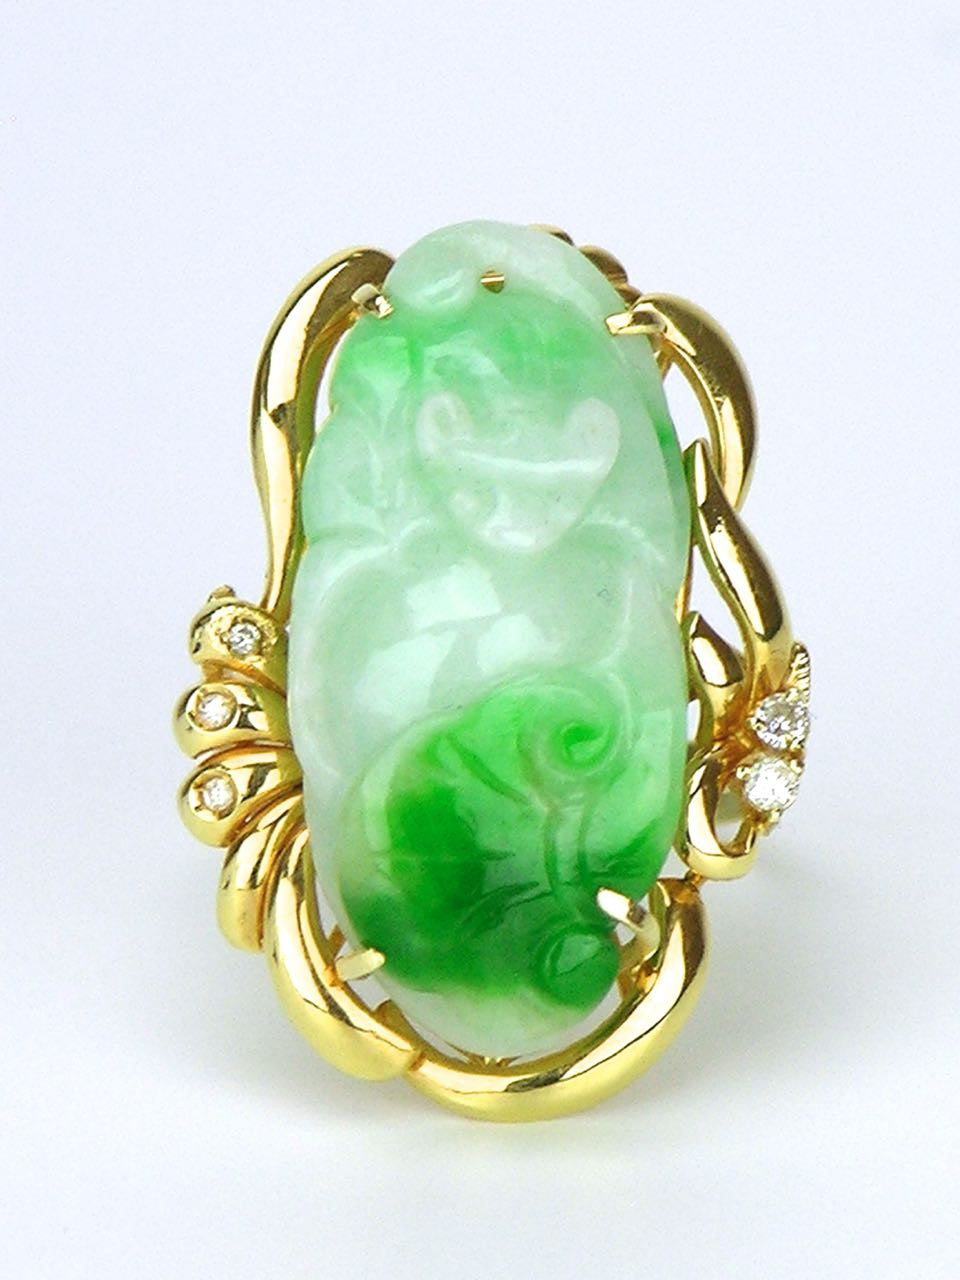 Vintage 14k Yellow Gold Carved Jade and Diamond Ring